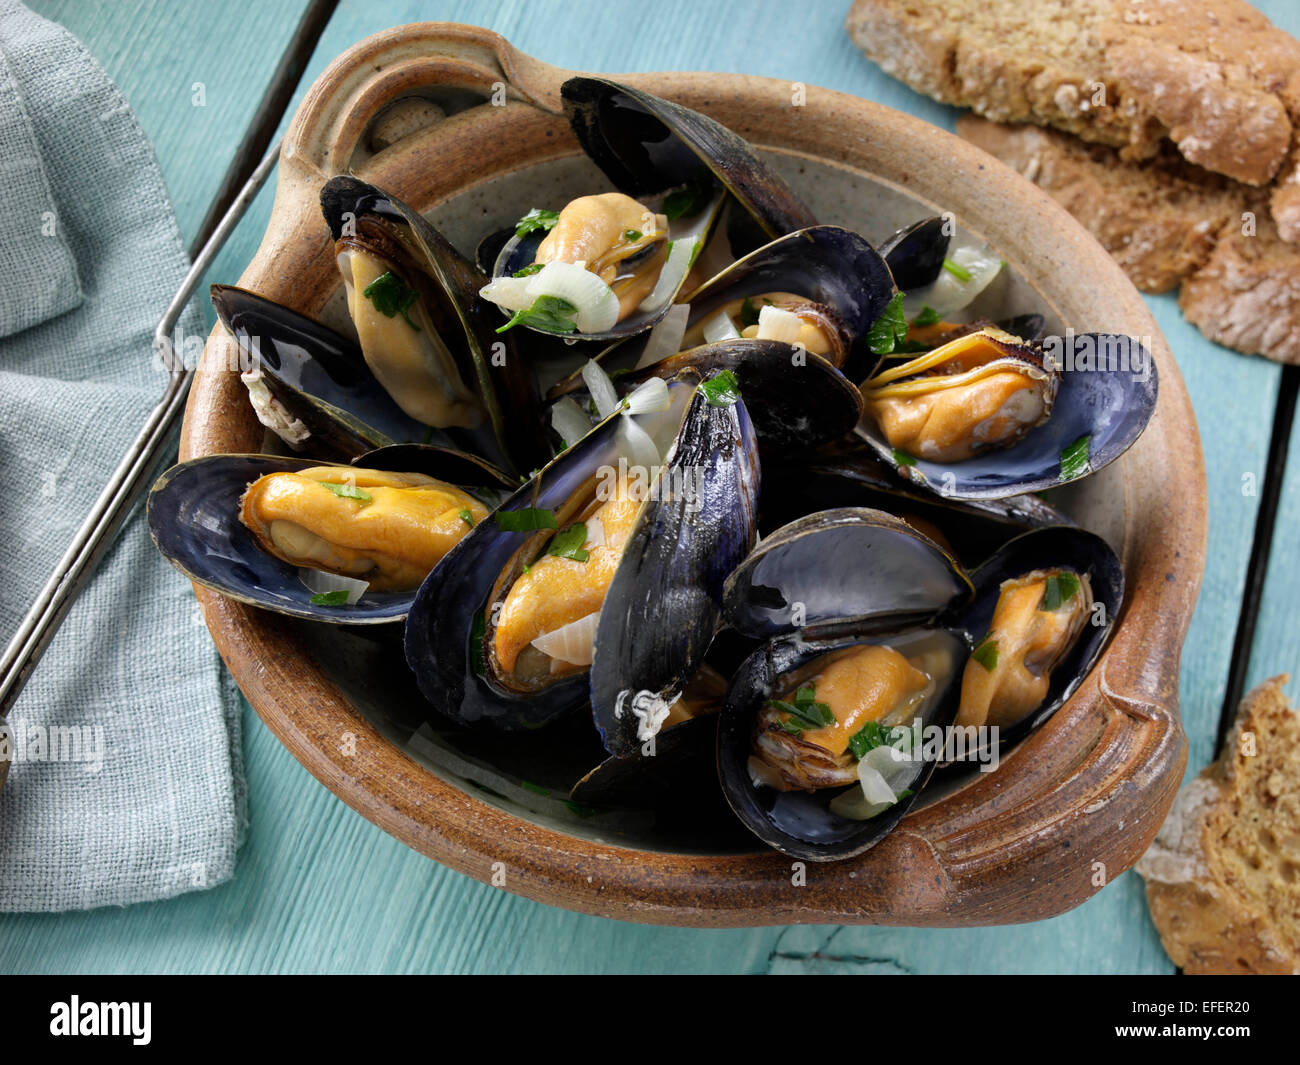 Mussels Stock Photo